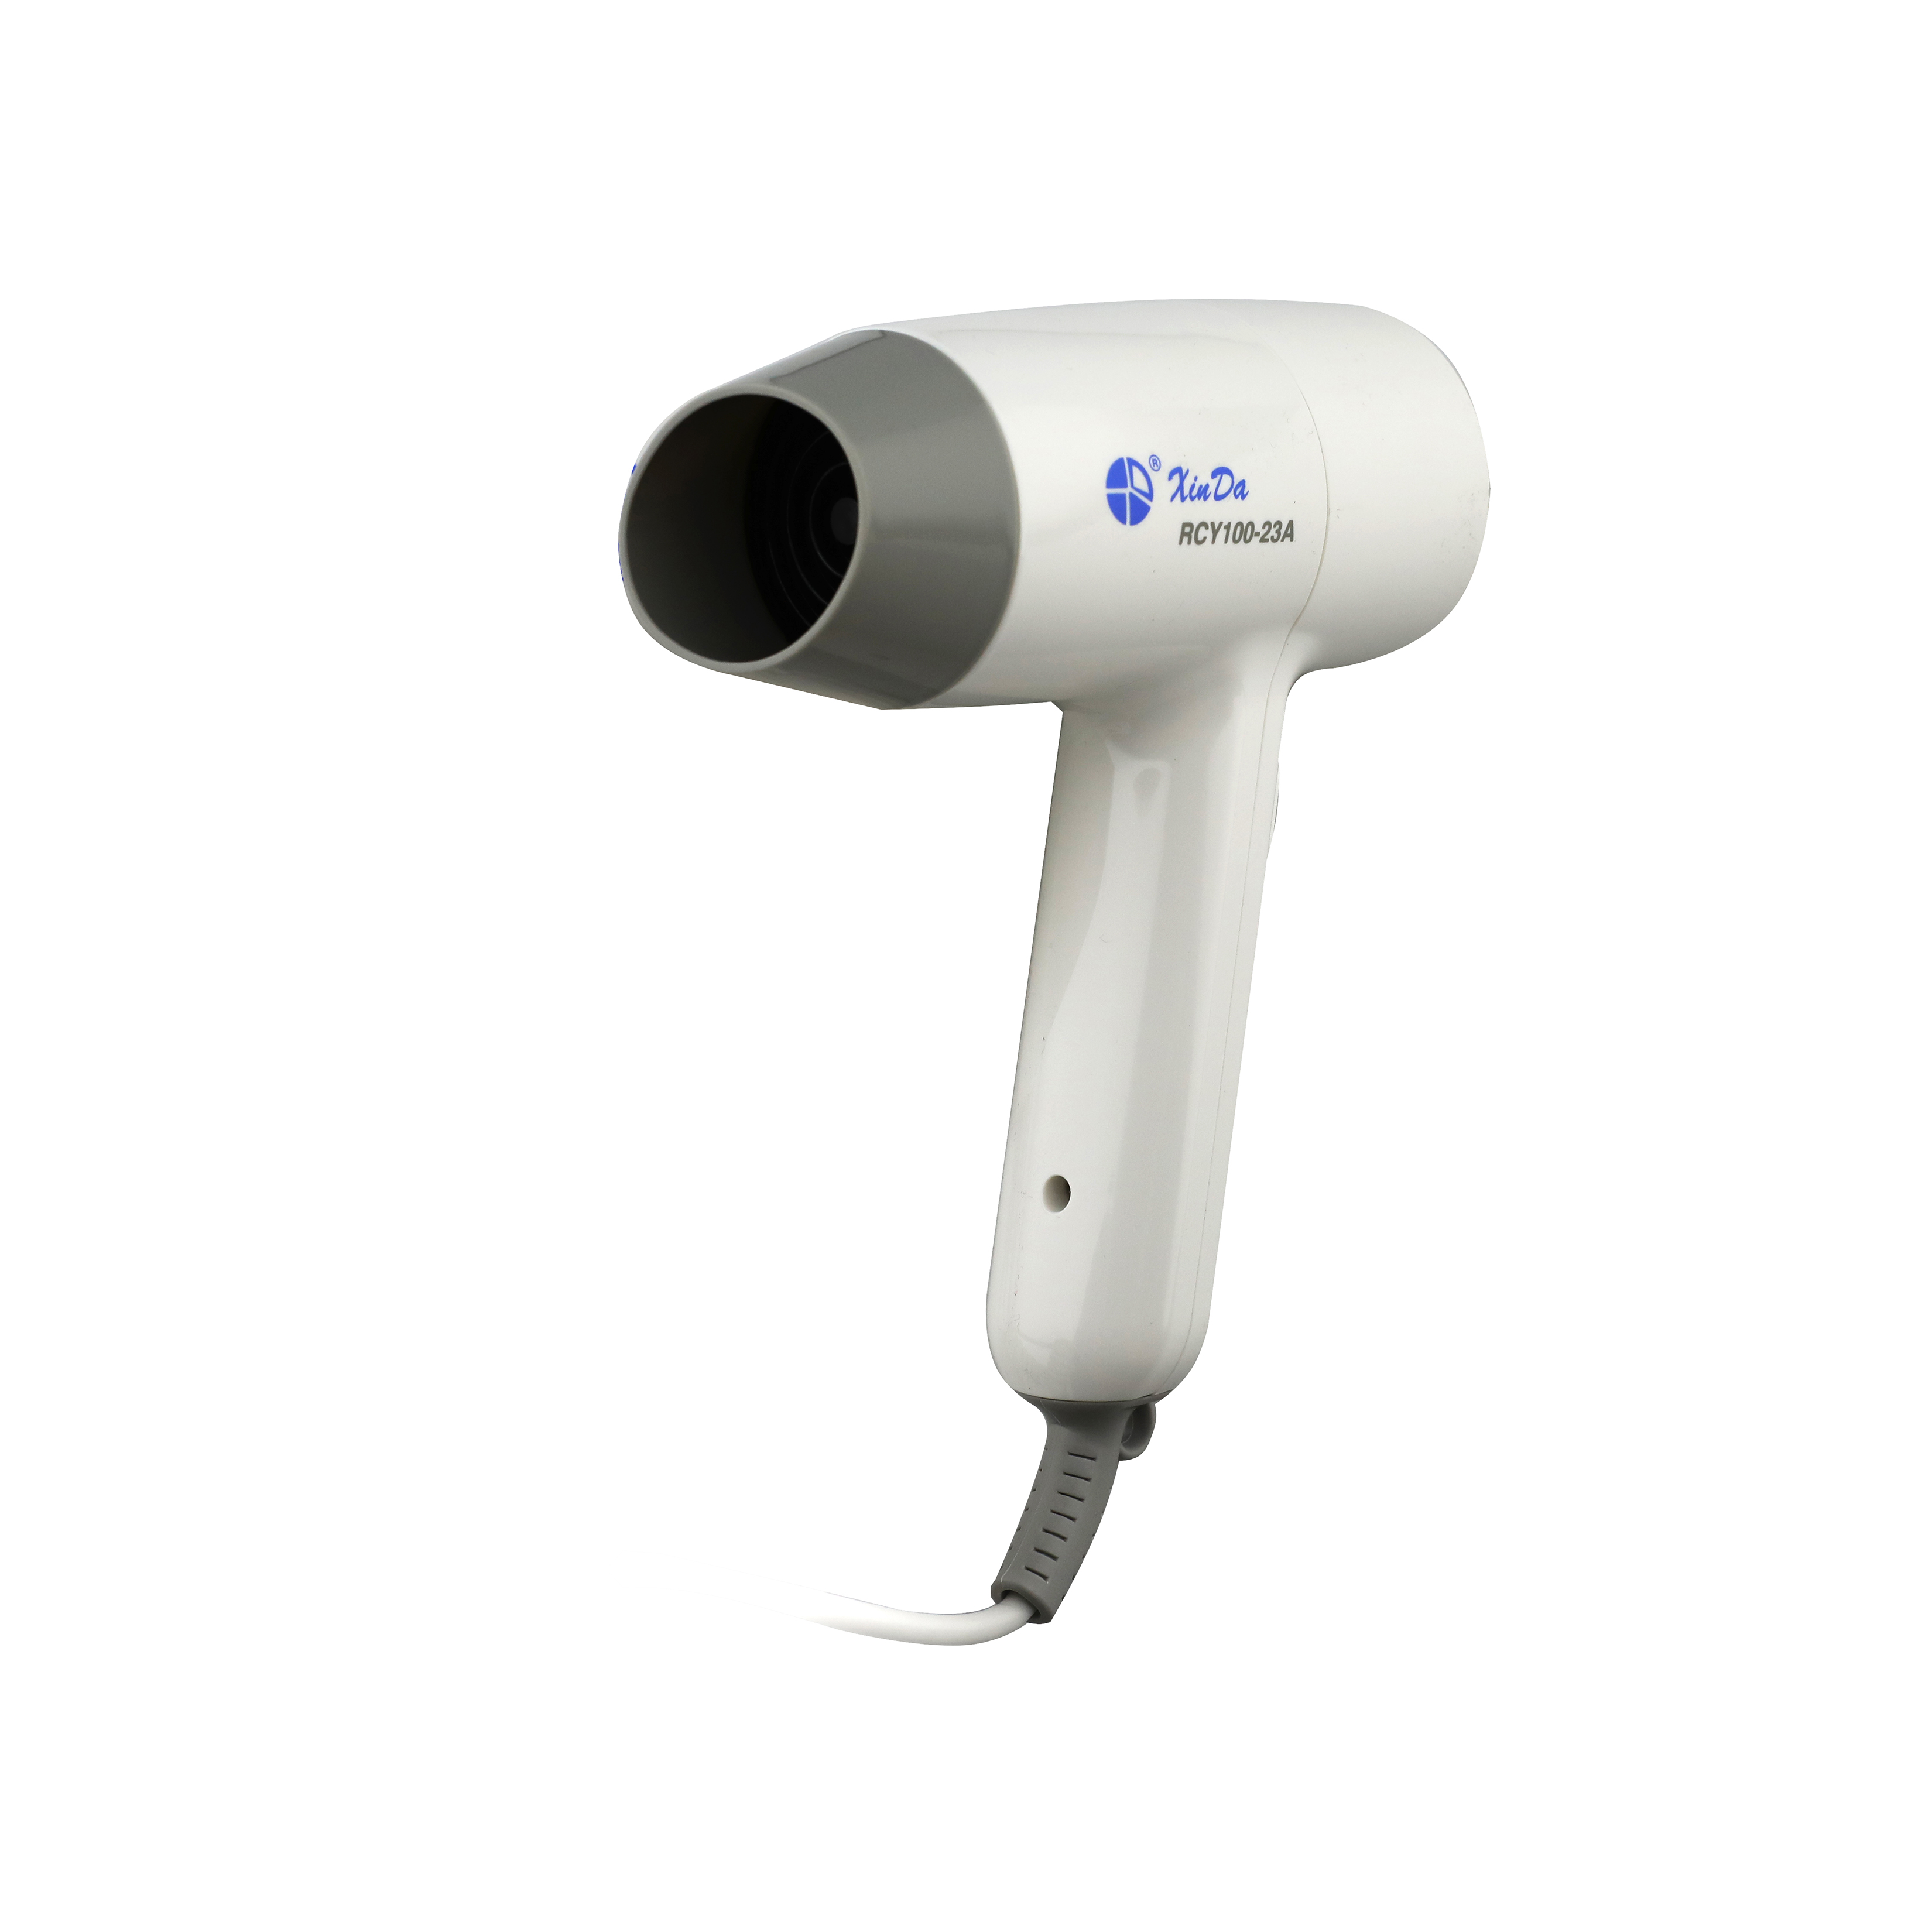 Wall-mounted Or Recessed Hair Dryerwall-mounted Hair Dryer Quick-drying